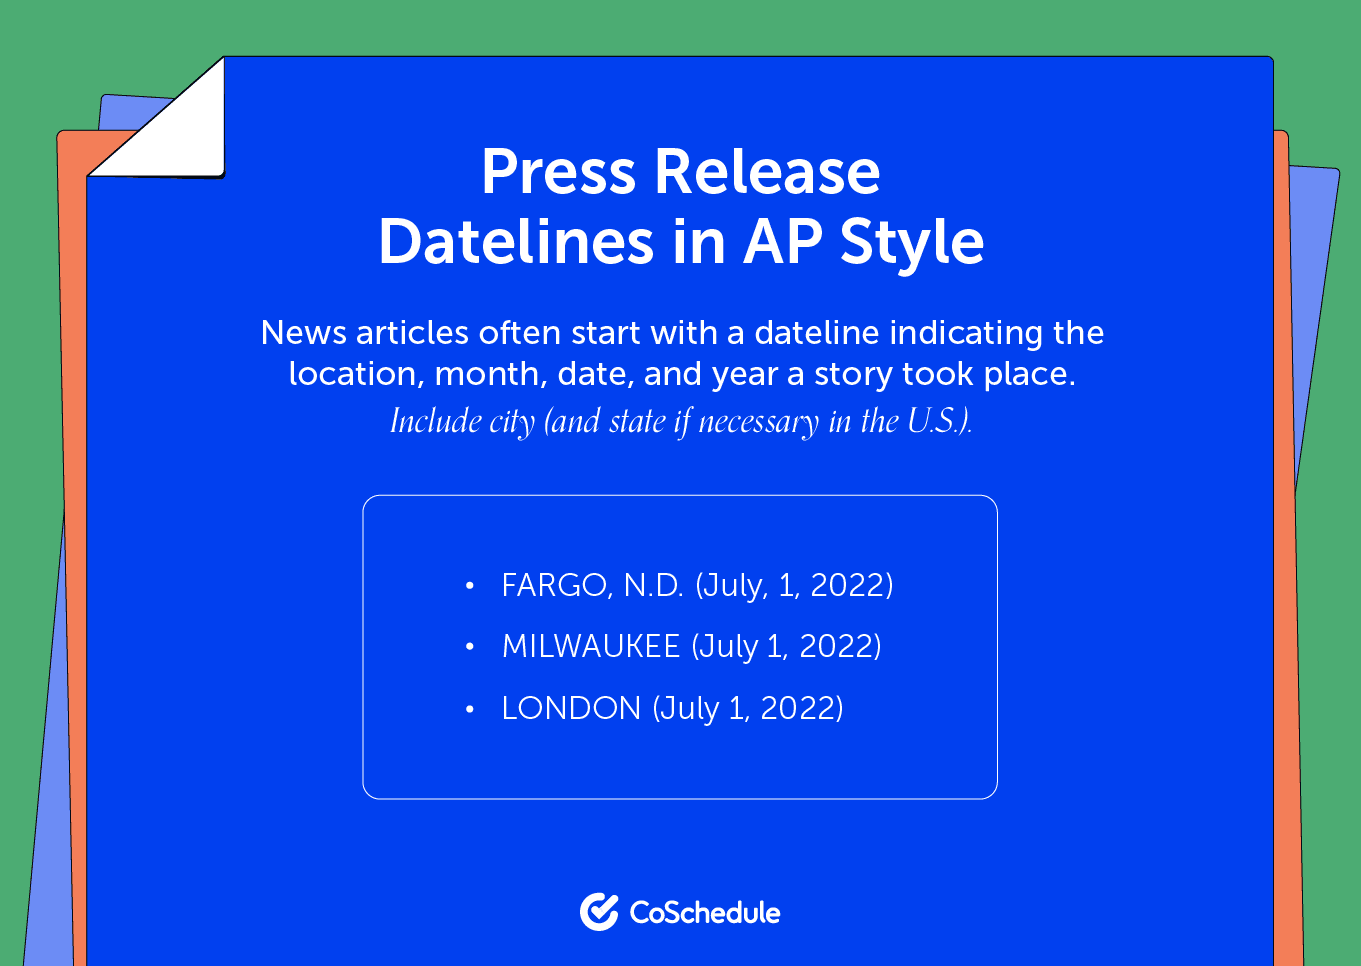 Press release datelines for AP style